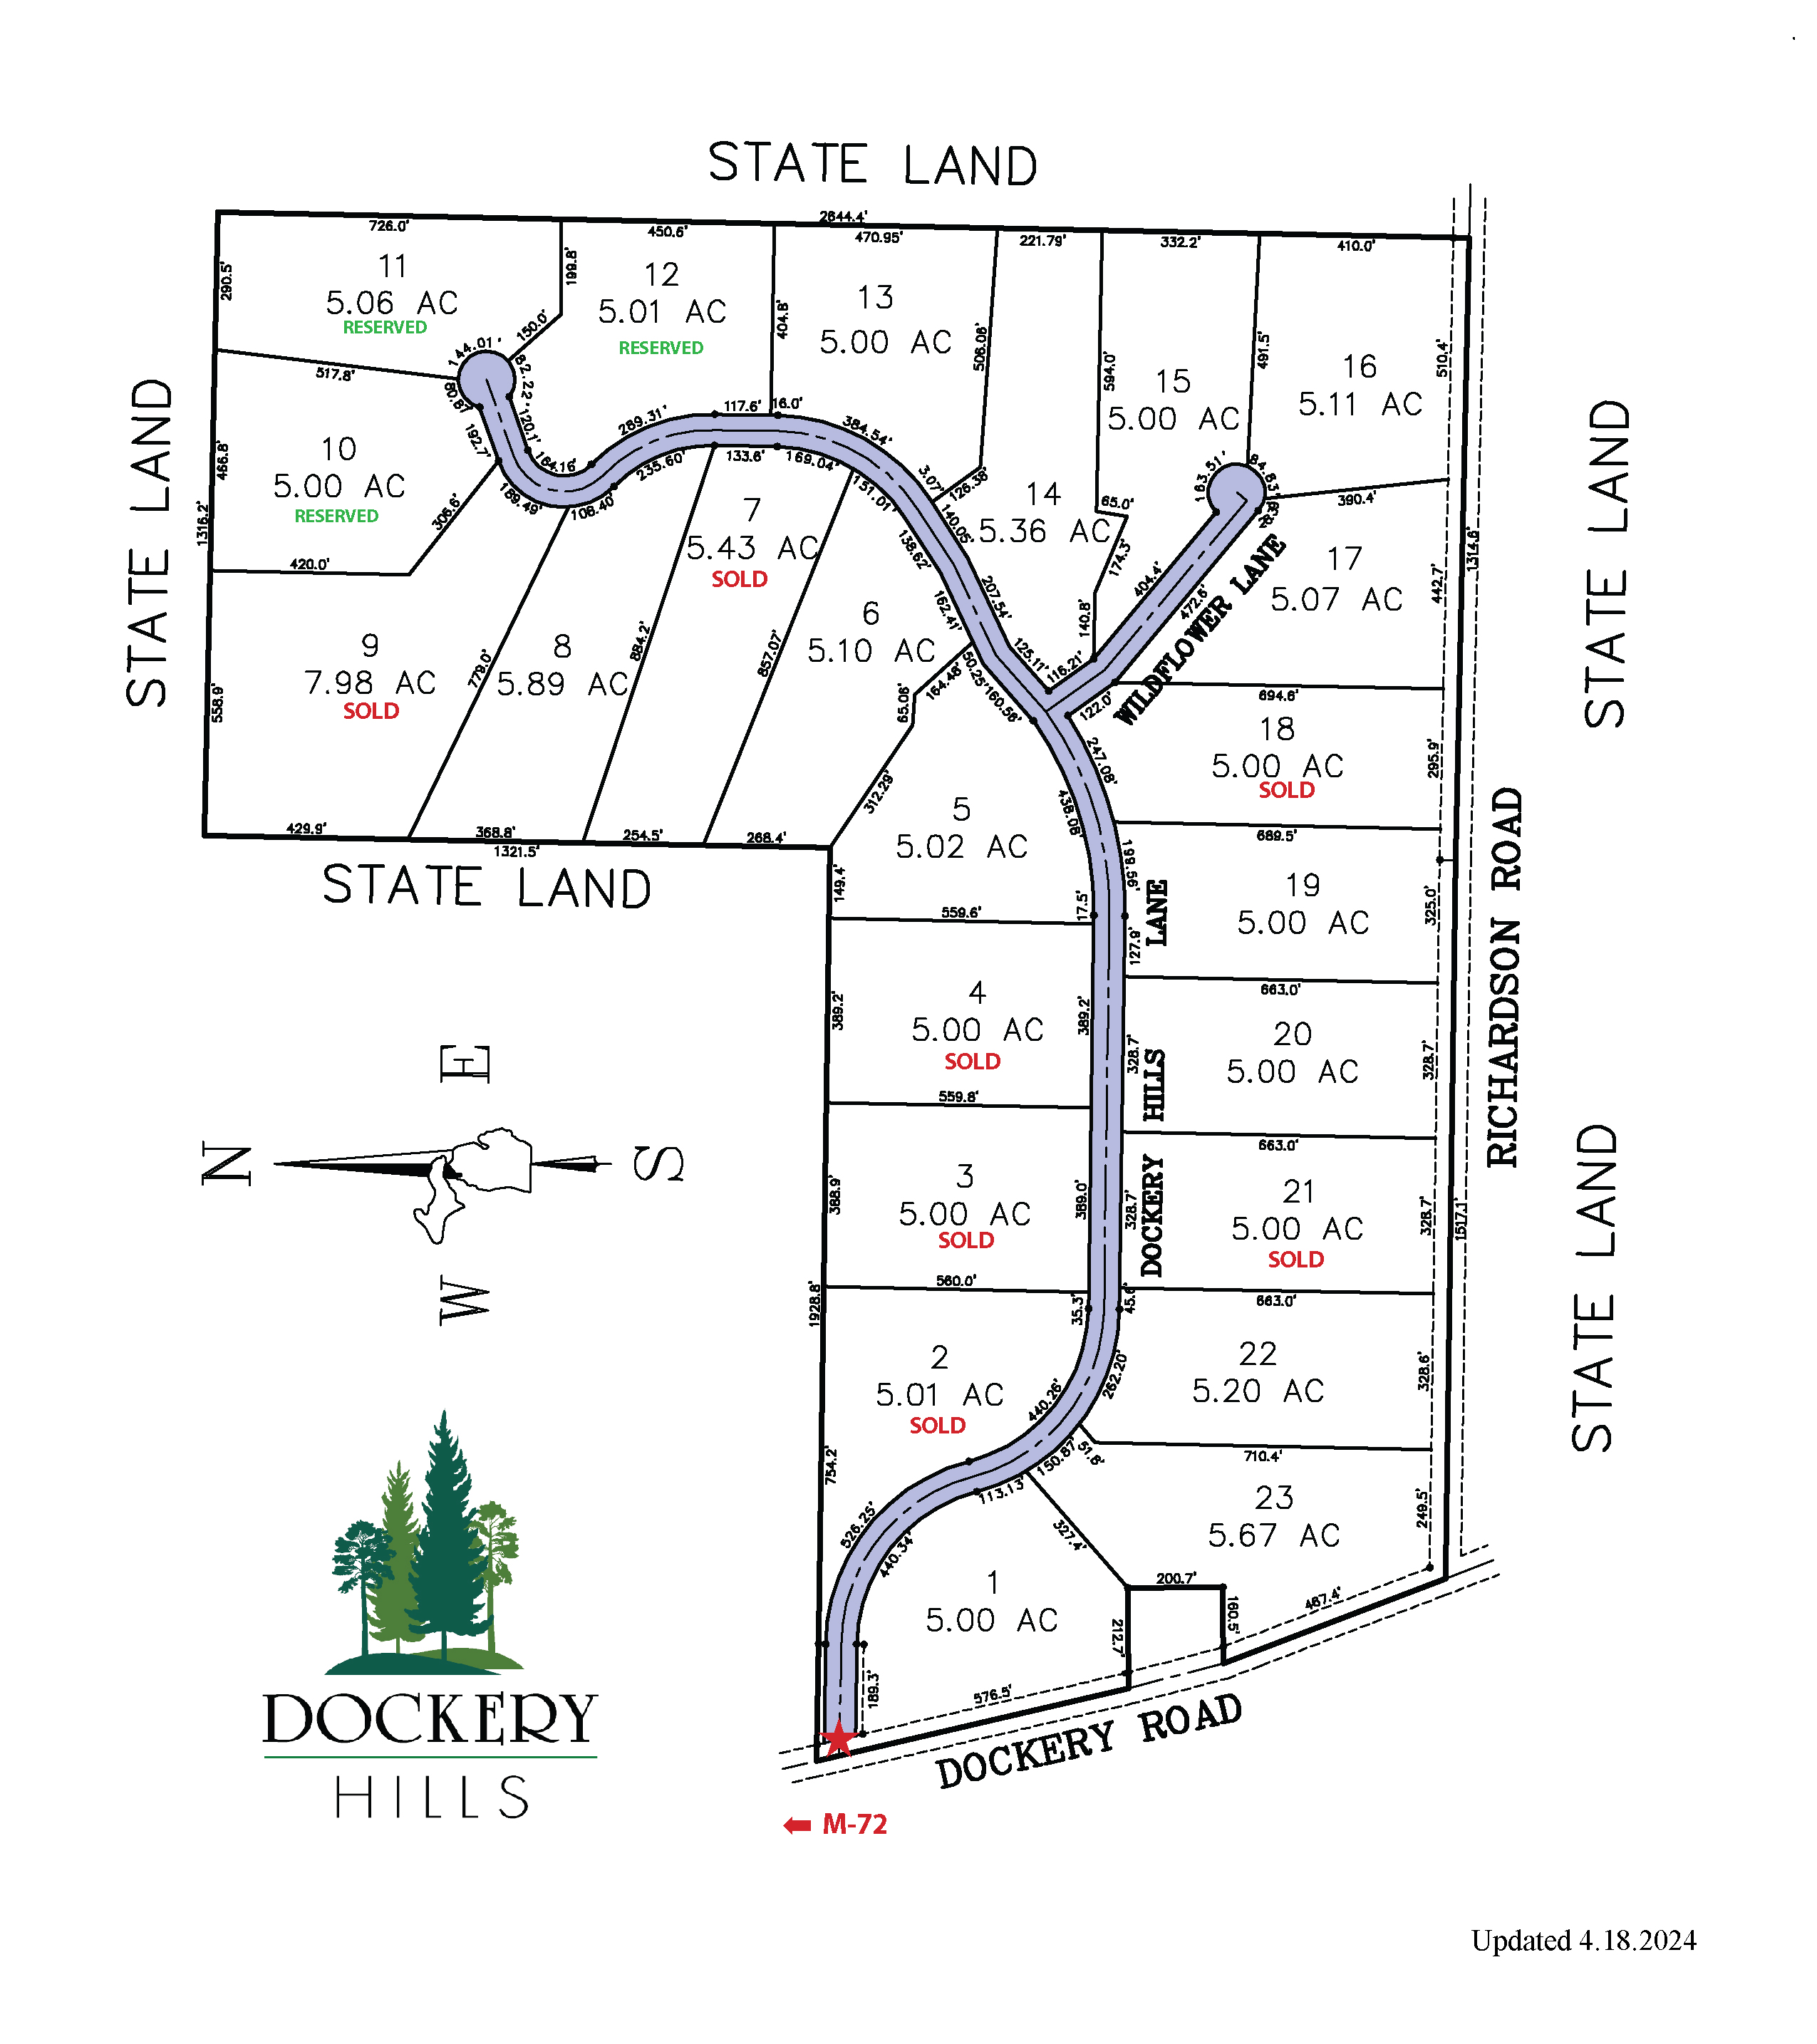 Dockery Hills property development map with street names and parcel status.